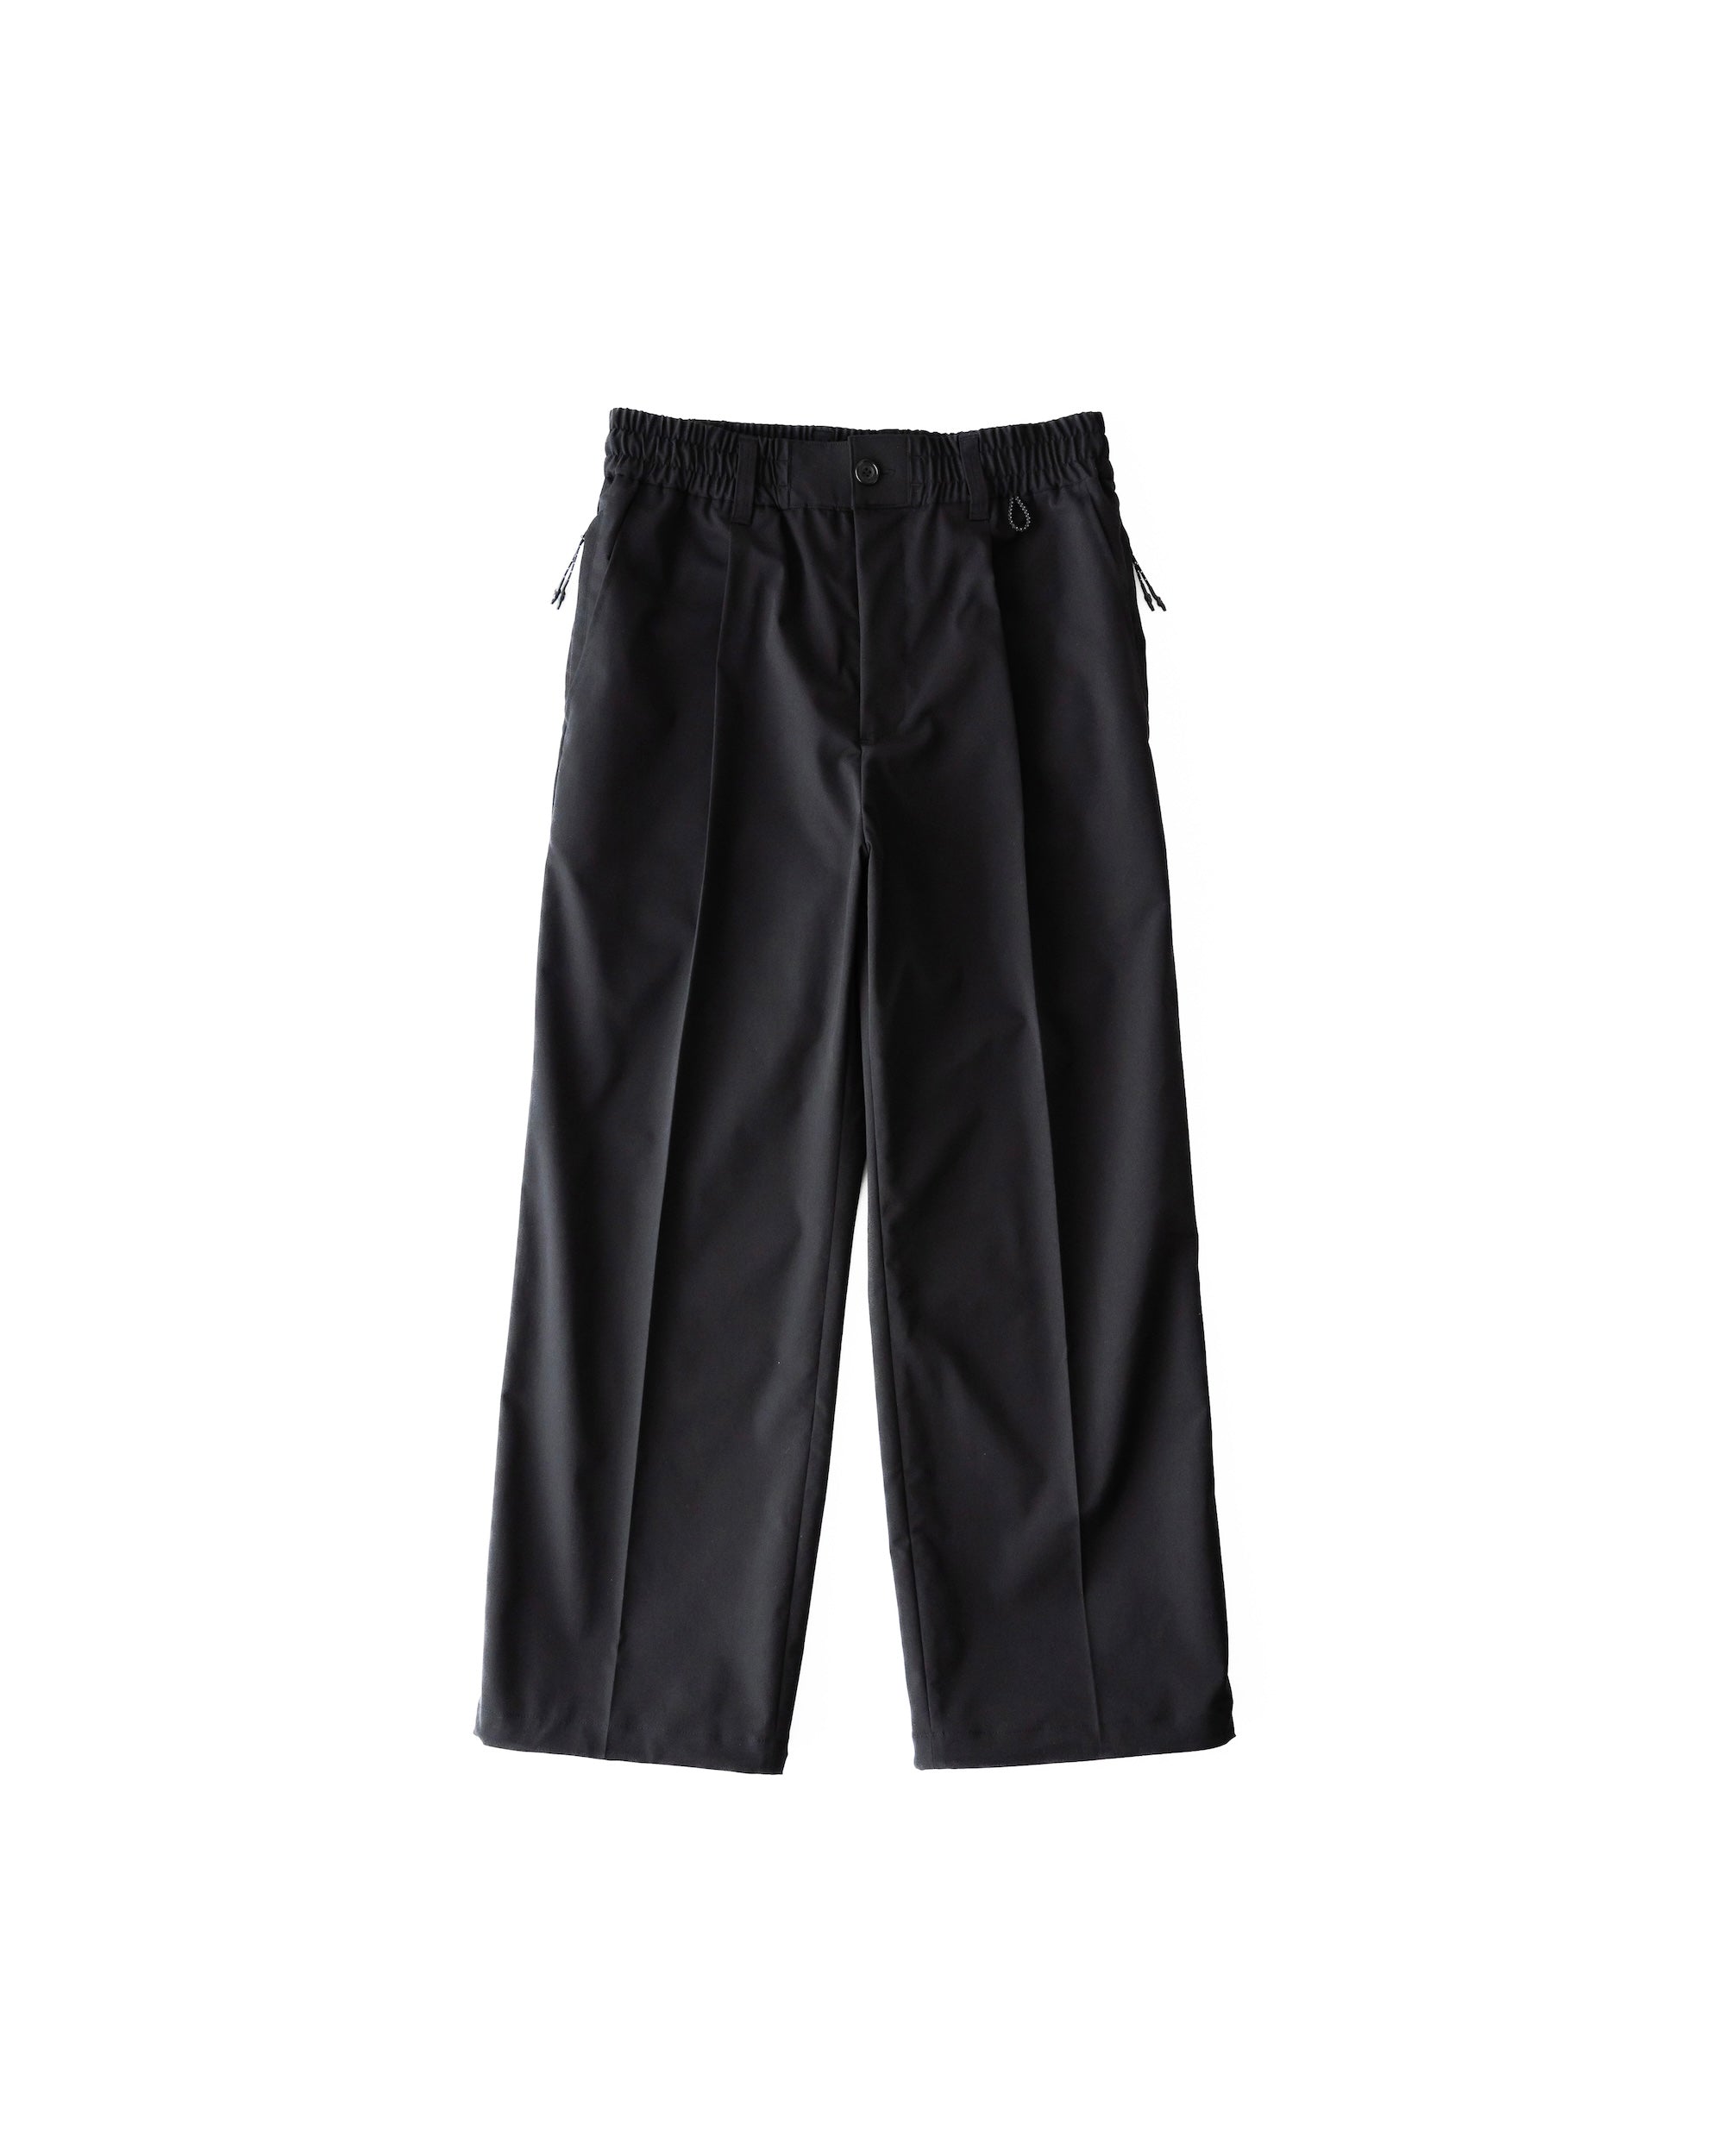 【6.5 WED 20:00- IN STOCK】ACTIVE STORAGE STRAIGHT PANTS.